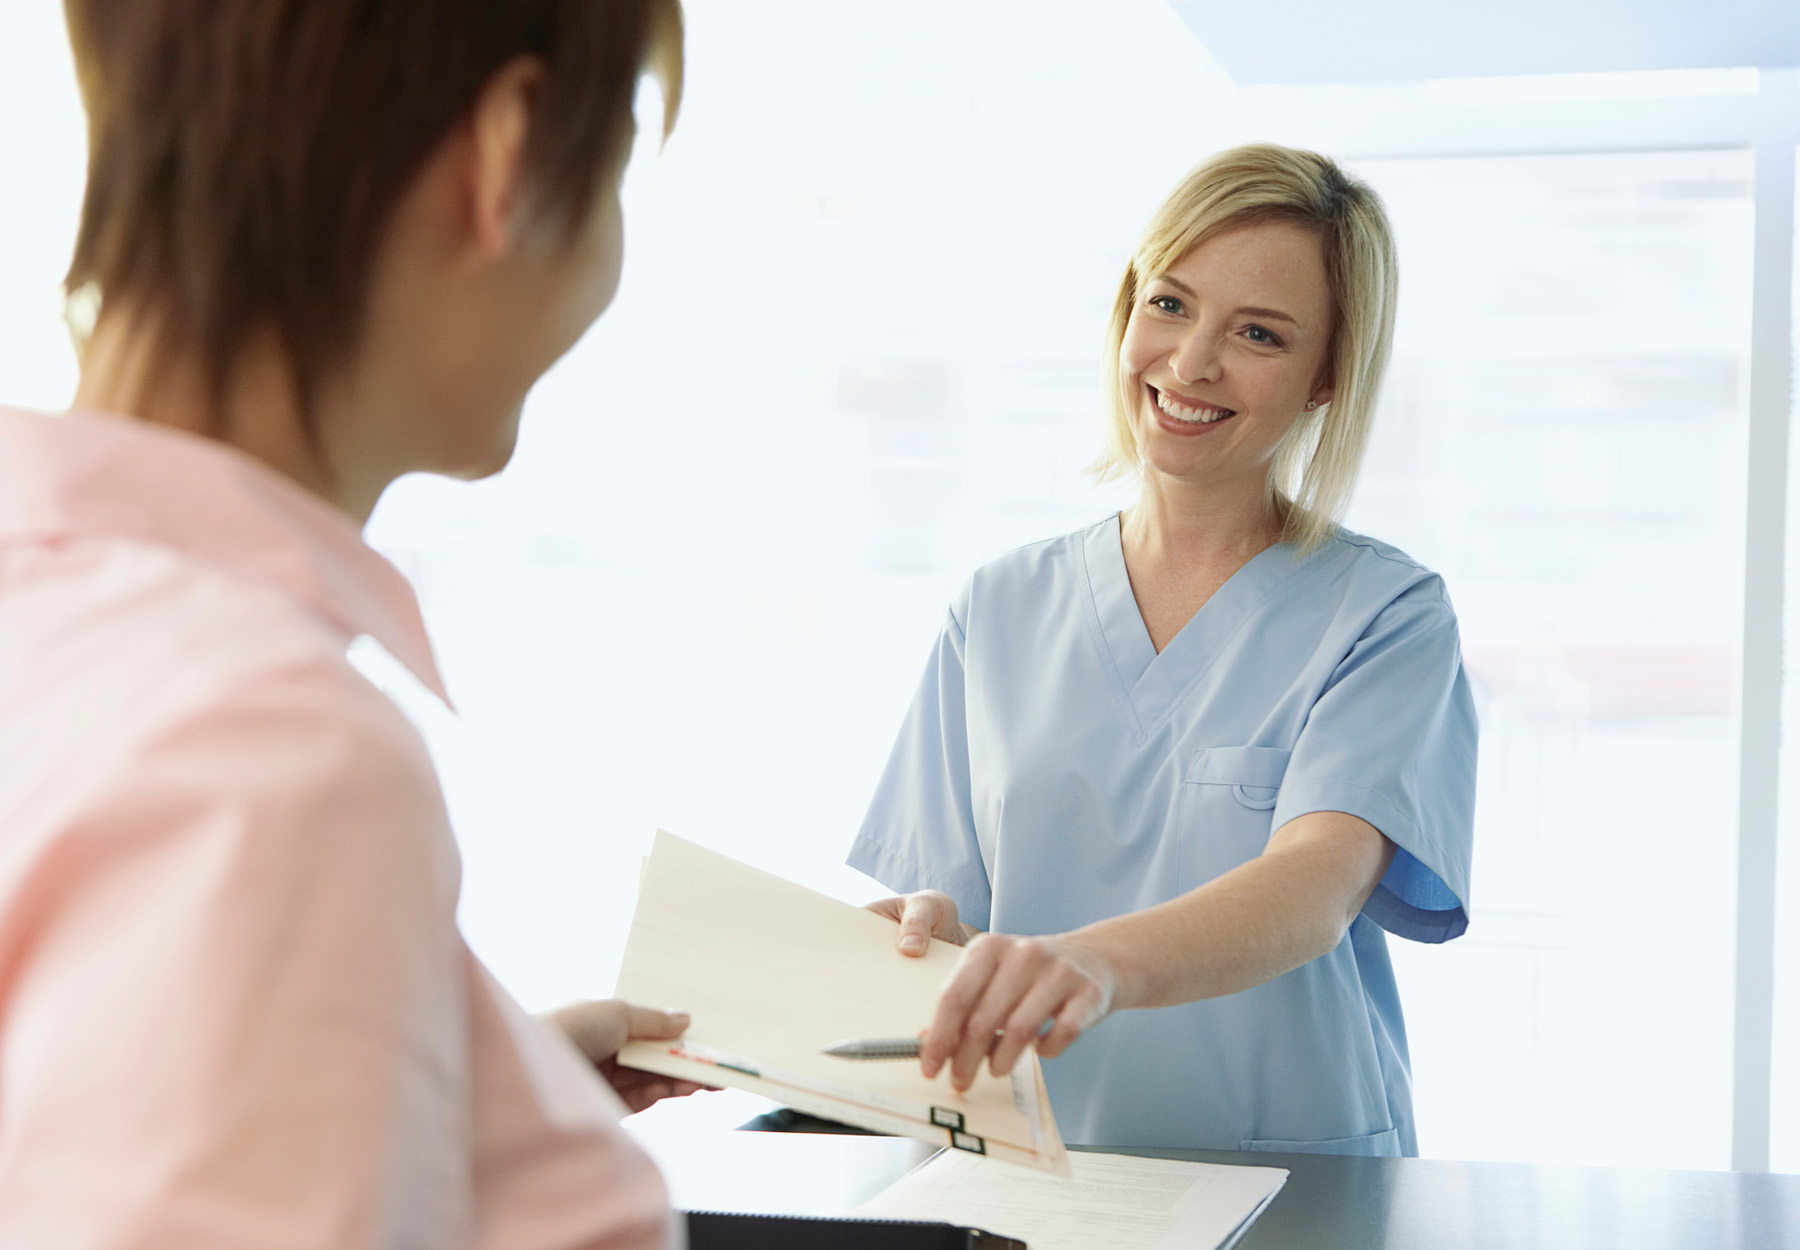 A female healthcare office assistant in light blue scrubs hands medical records and a pen to a female patient. Stock photo.